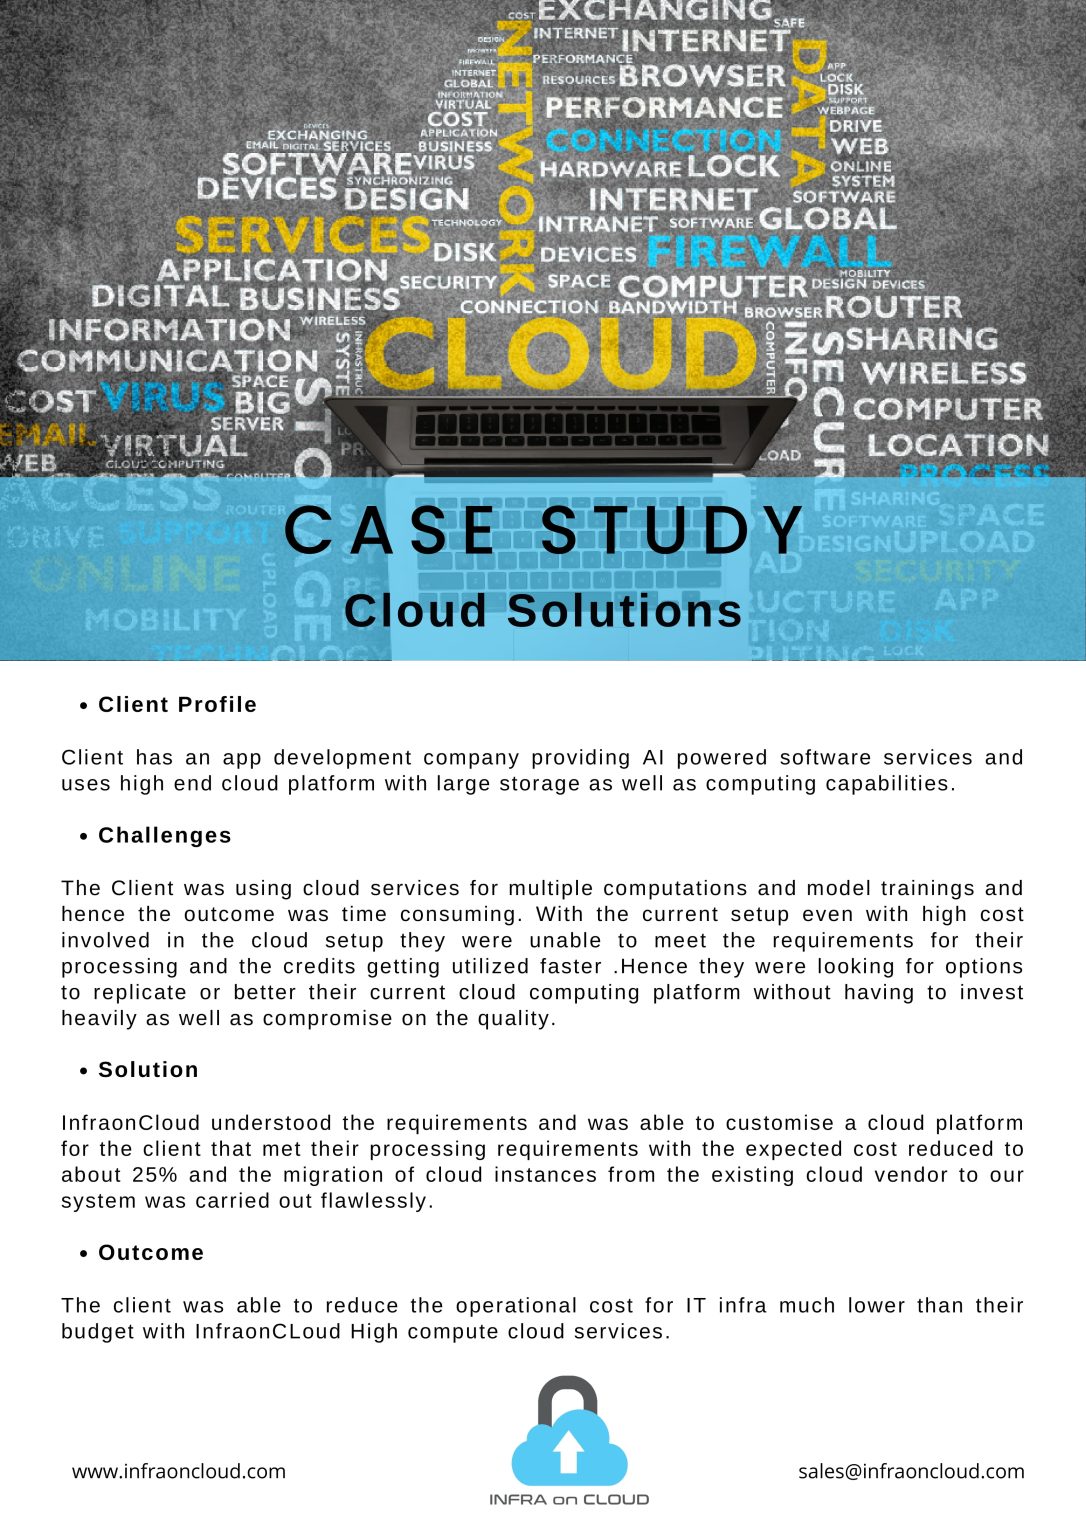 an explanatory case study on cloud computing applications in the built environment